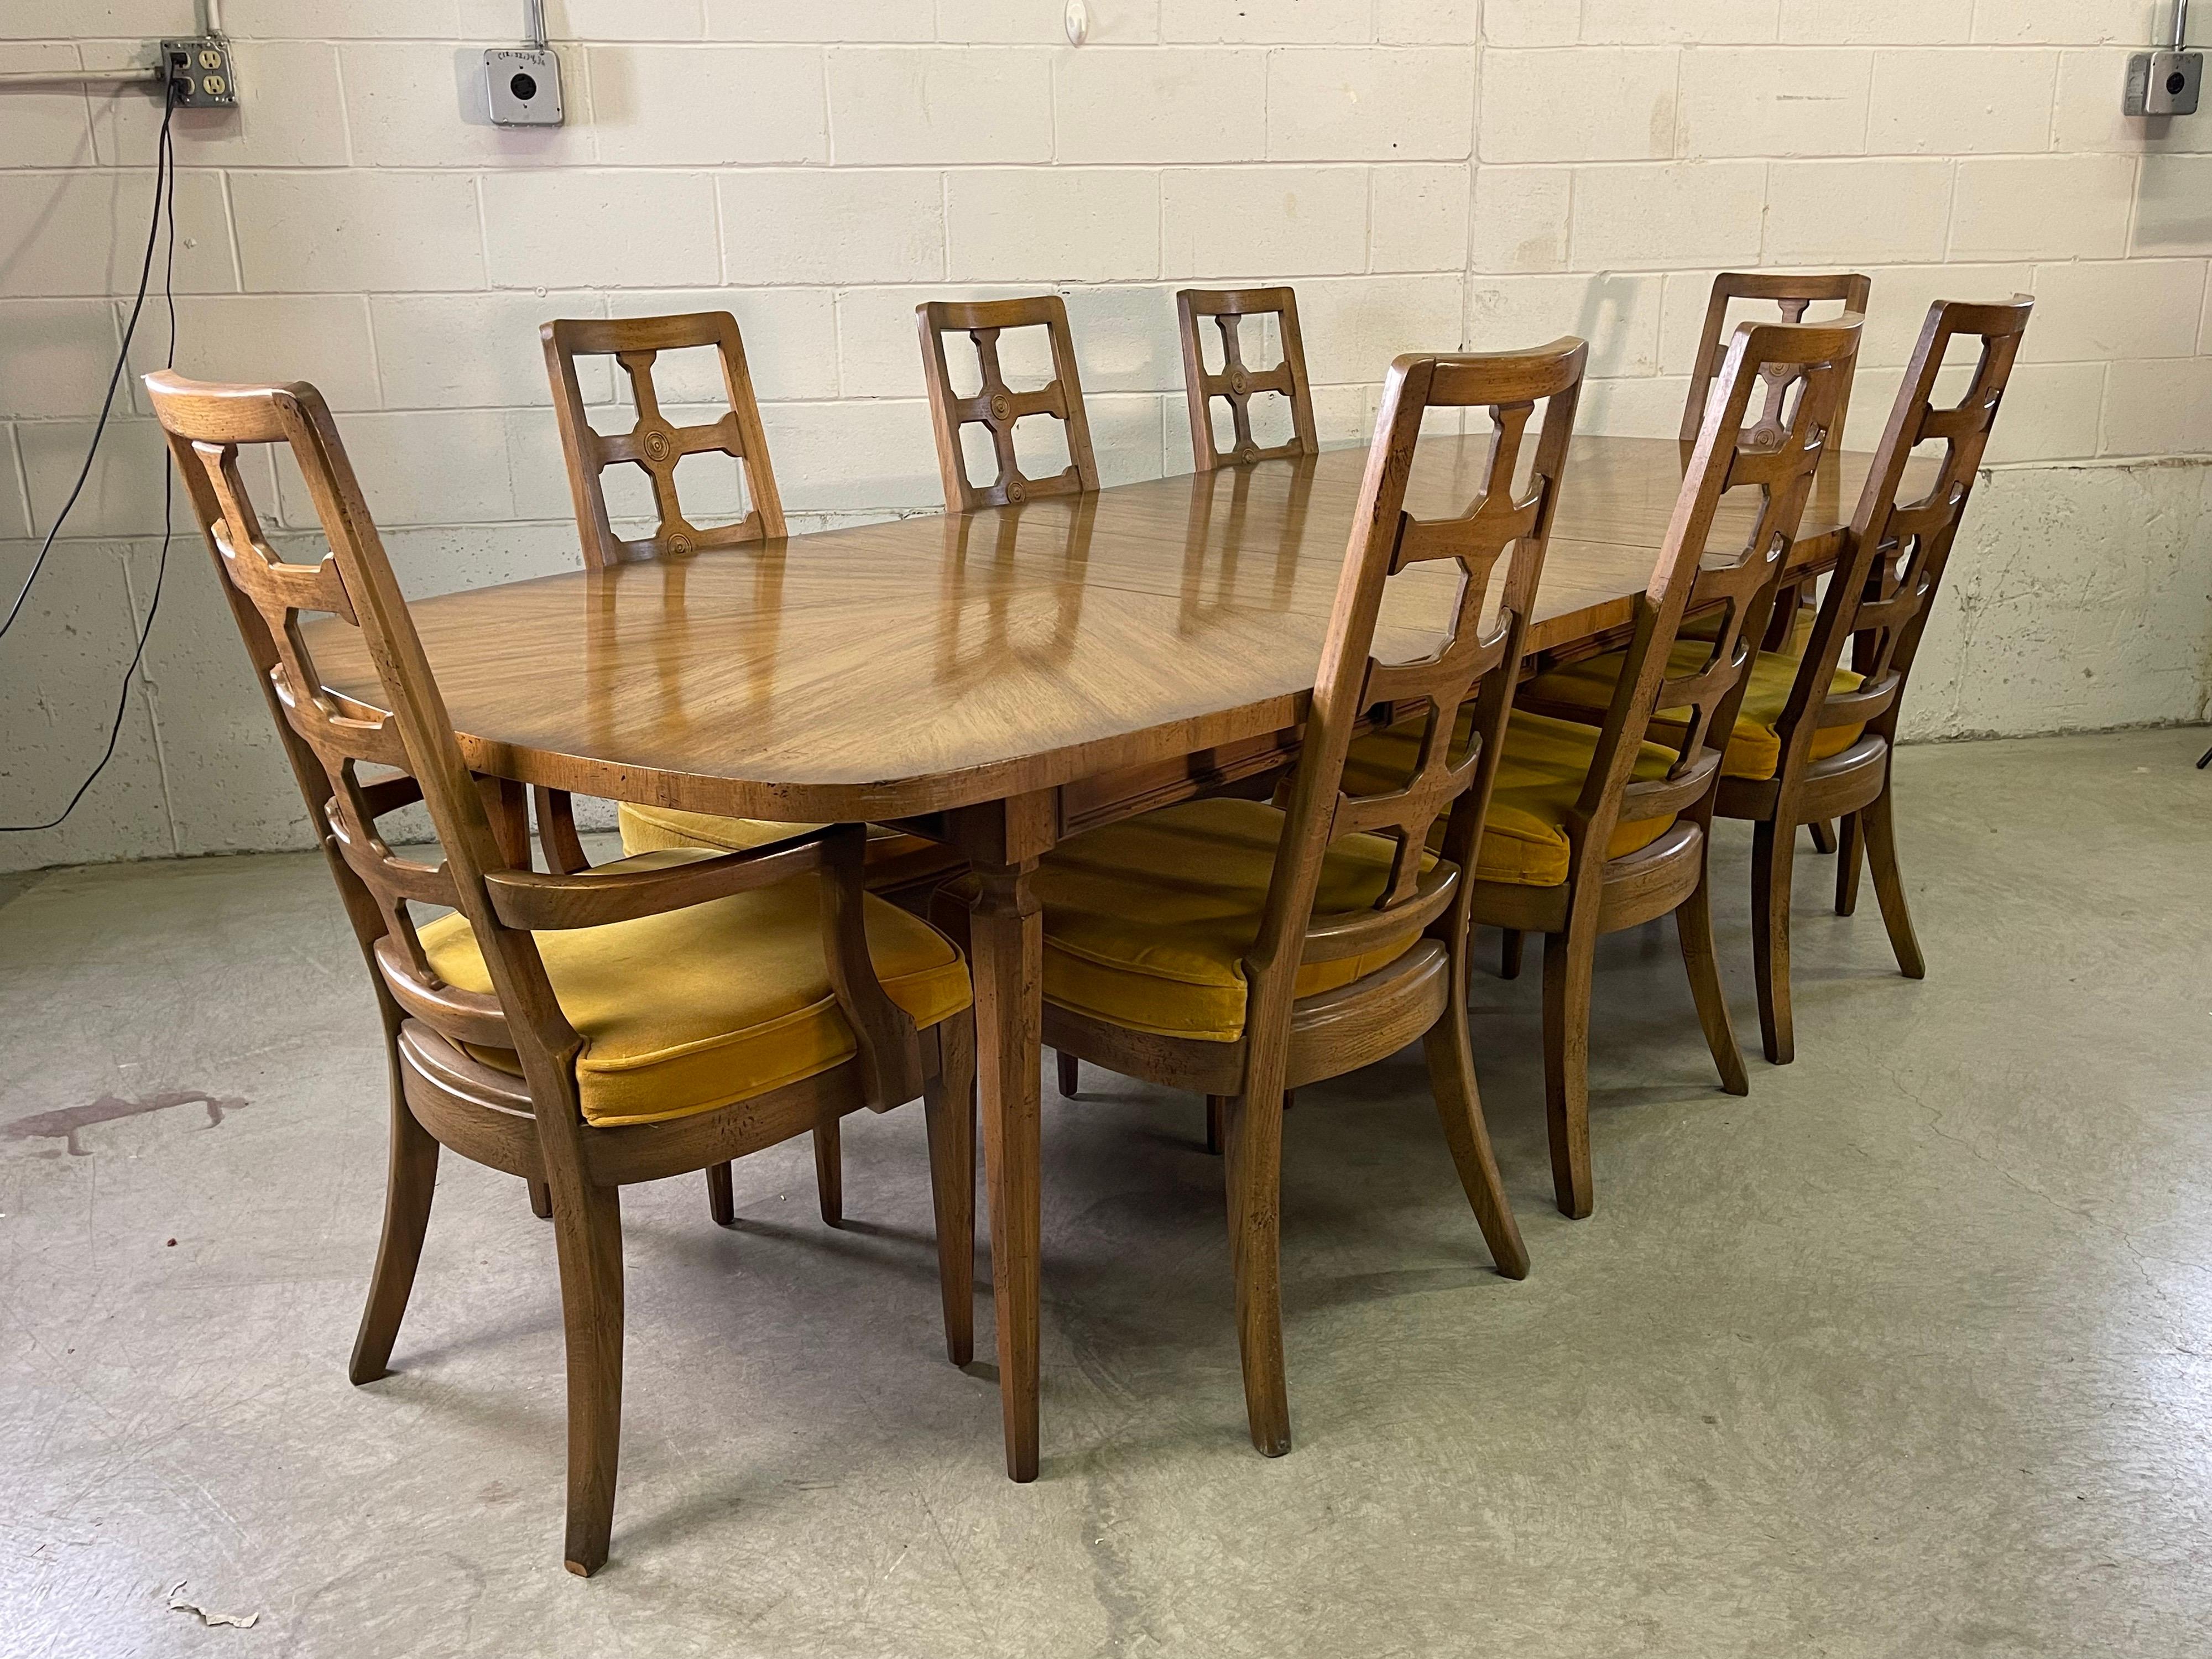 Vintage 1960s dining table with 8 chairs. The table has 3 additional boards to expand. The table top has a chevron design with black accents all over the table and chairs. The chairs come with 2 captain chairs and 6 regular chairs. Table and chairs